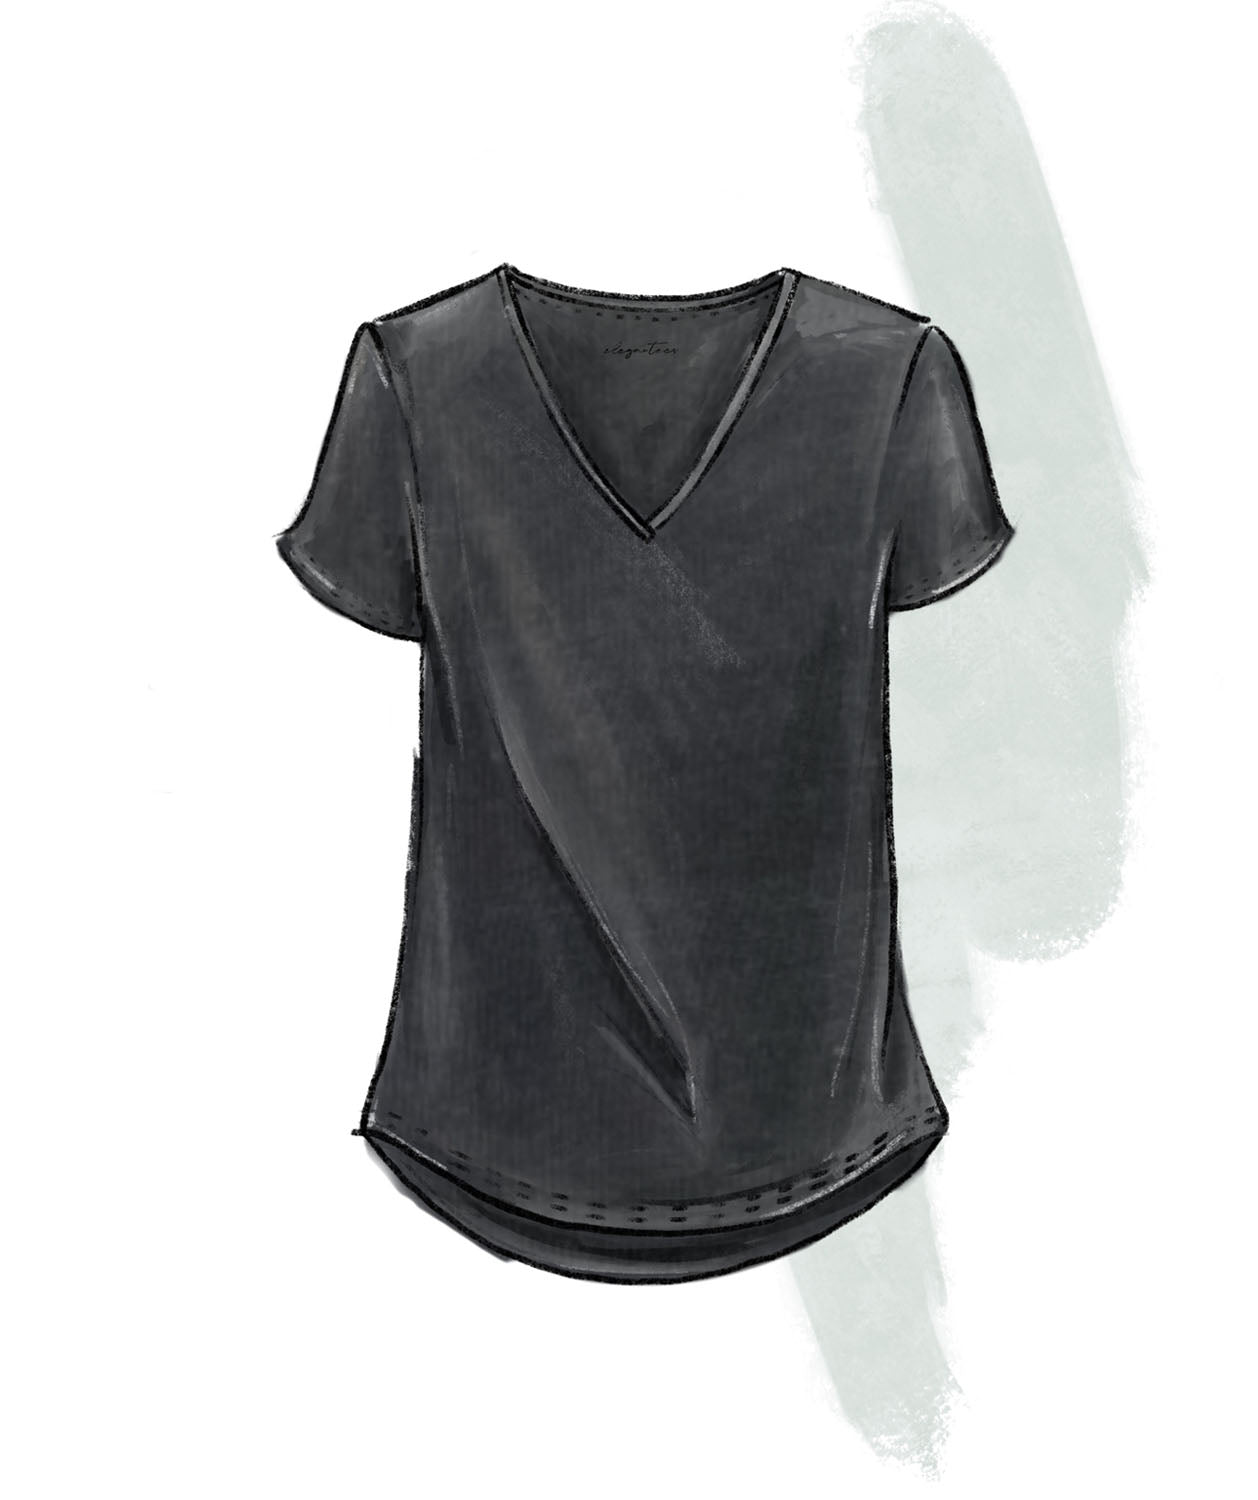 Impact promo: Women's V-neck tee in Charcoal